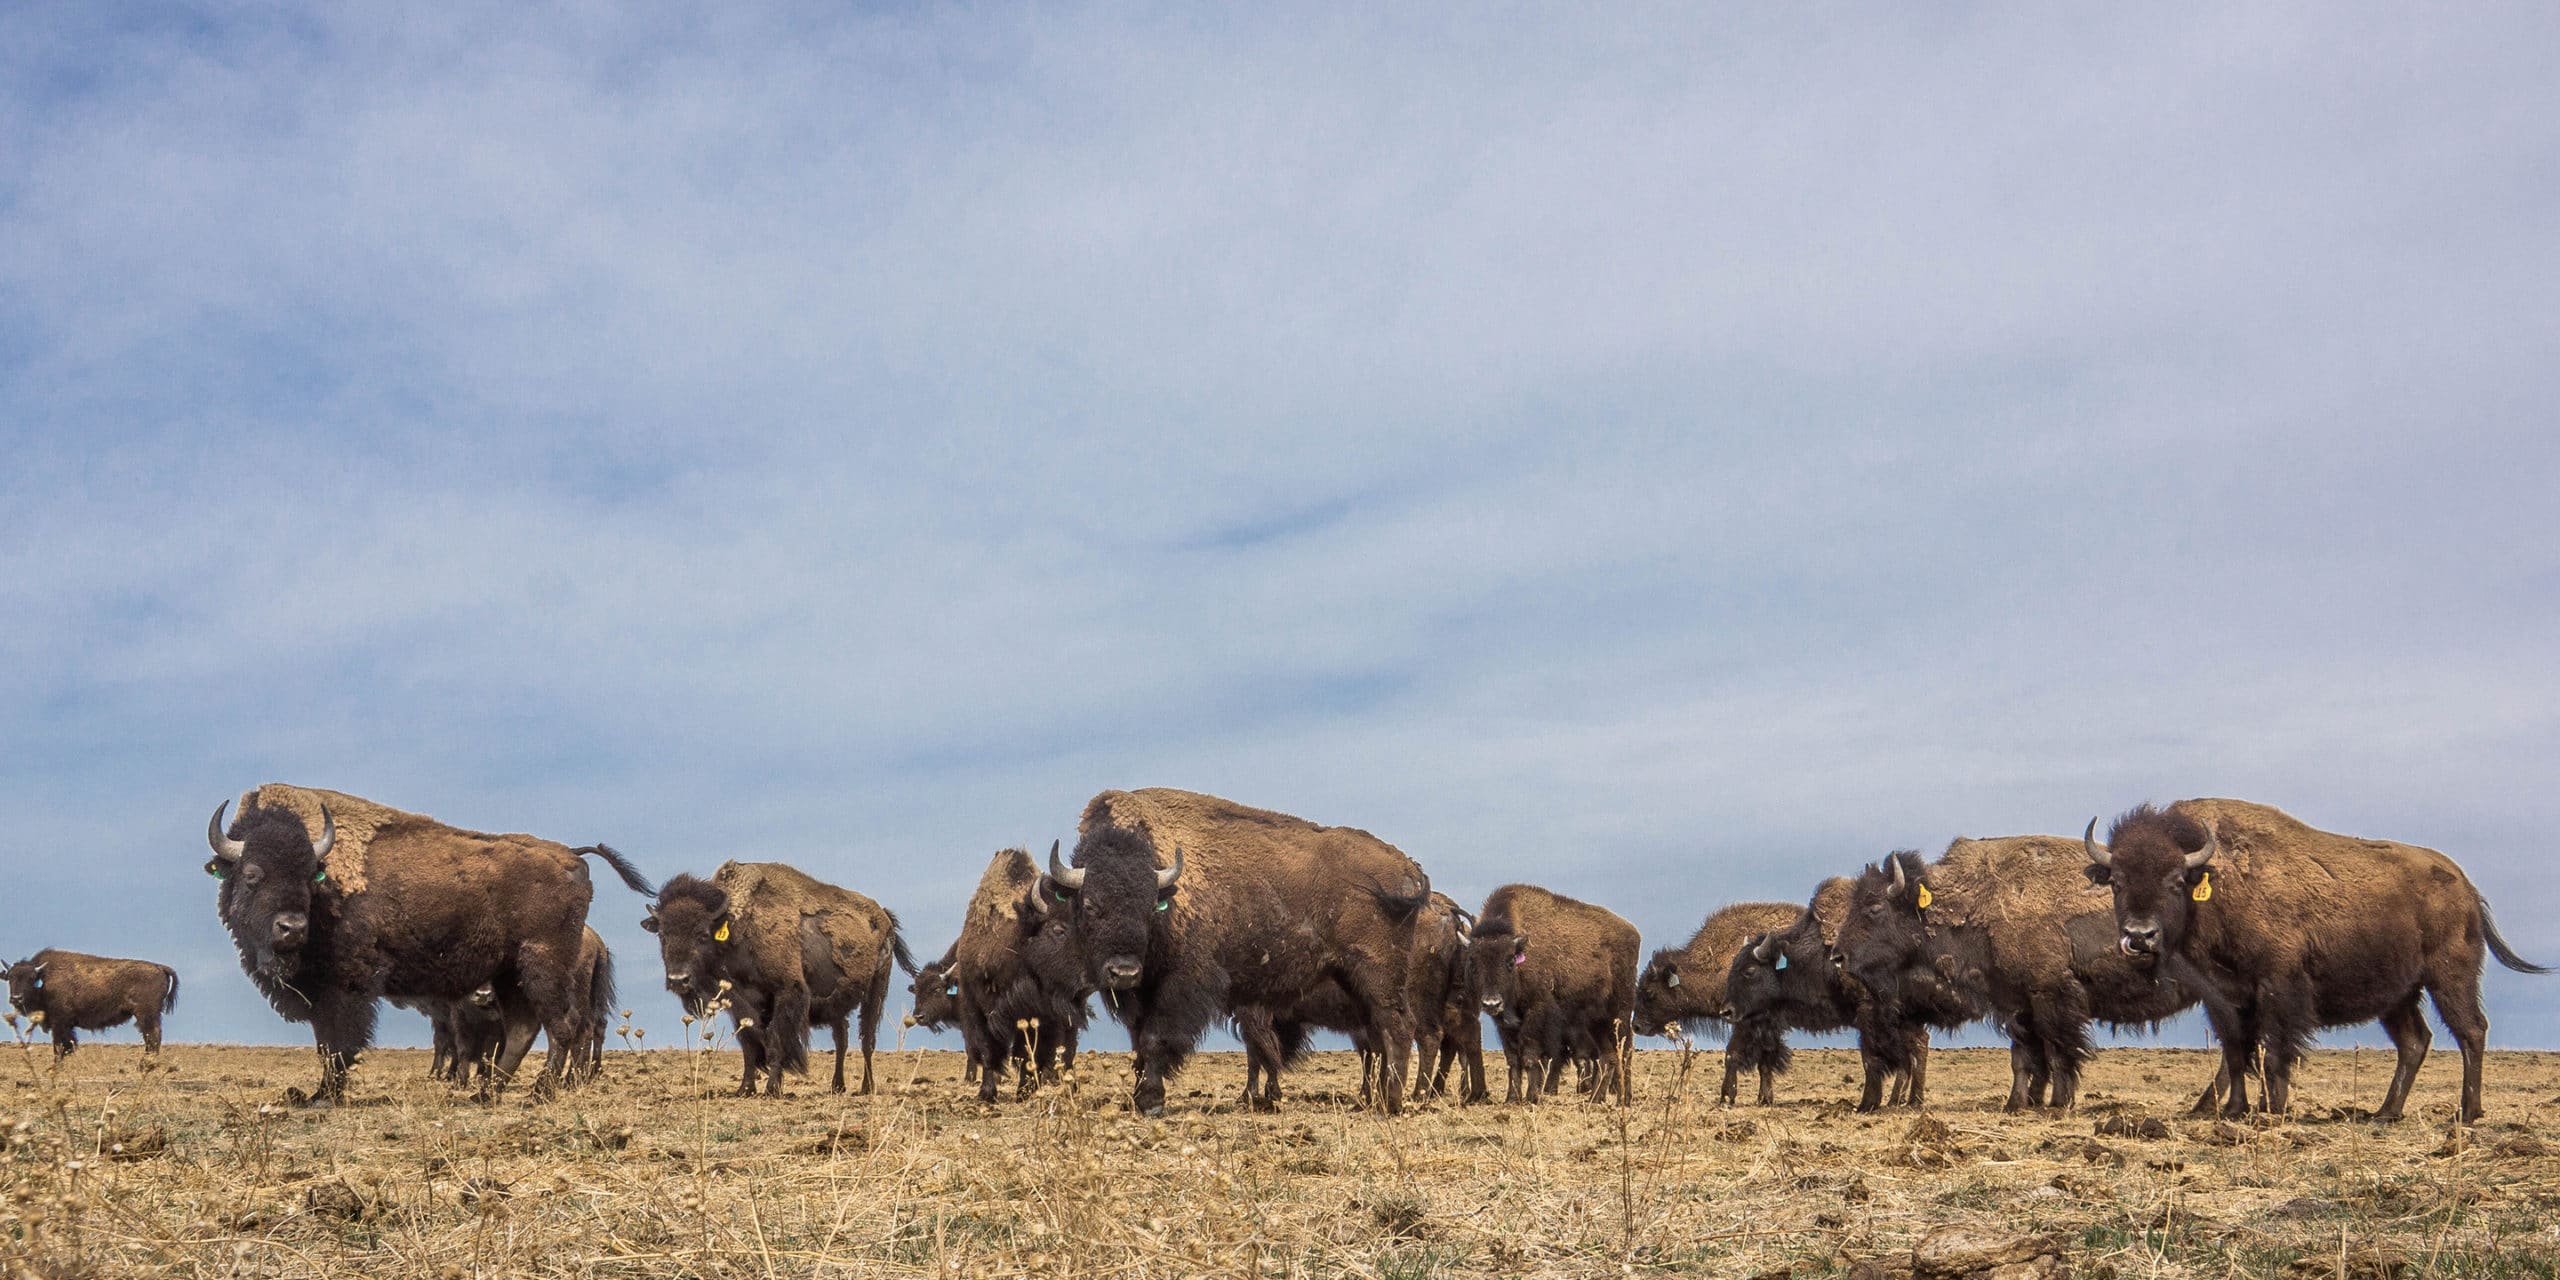 Restoring the Buffalo Herds to the Land of